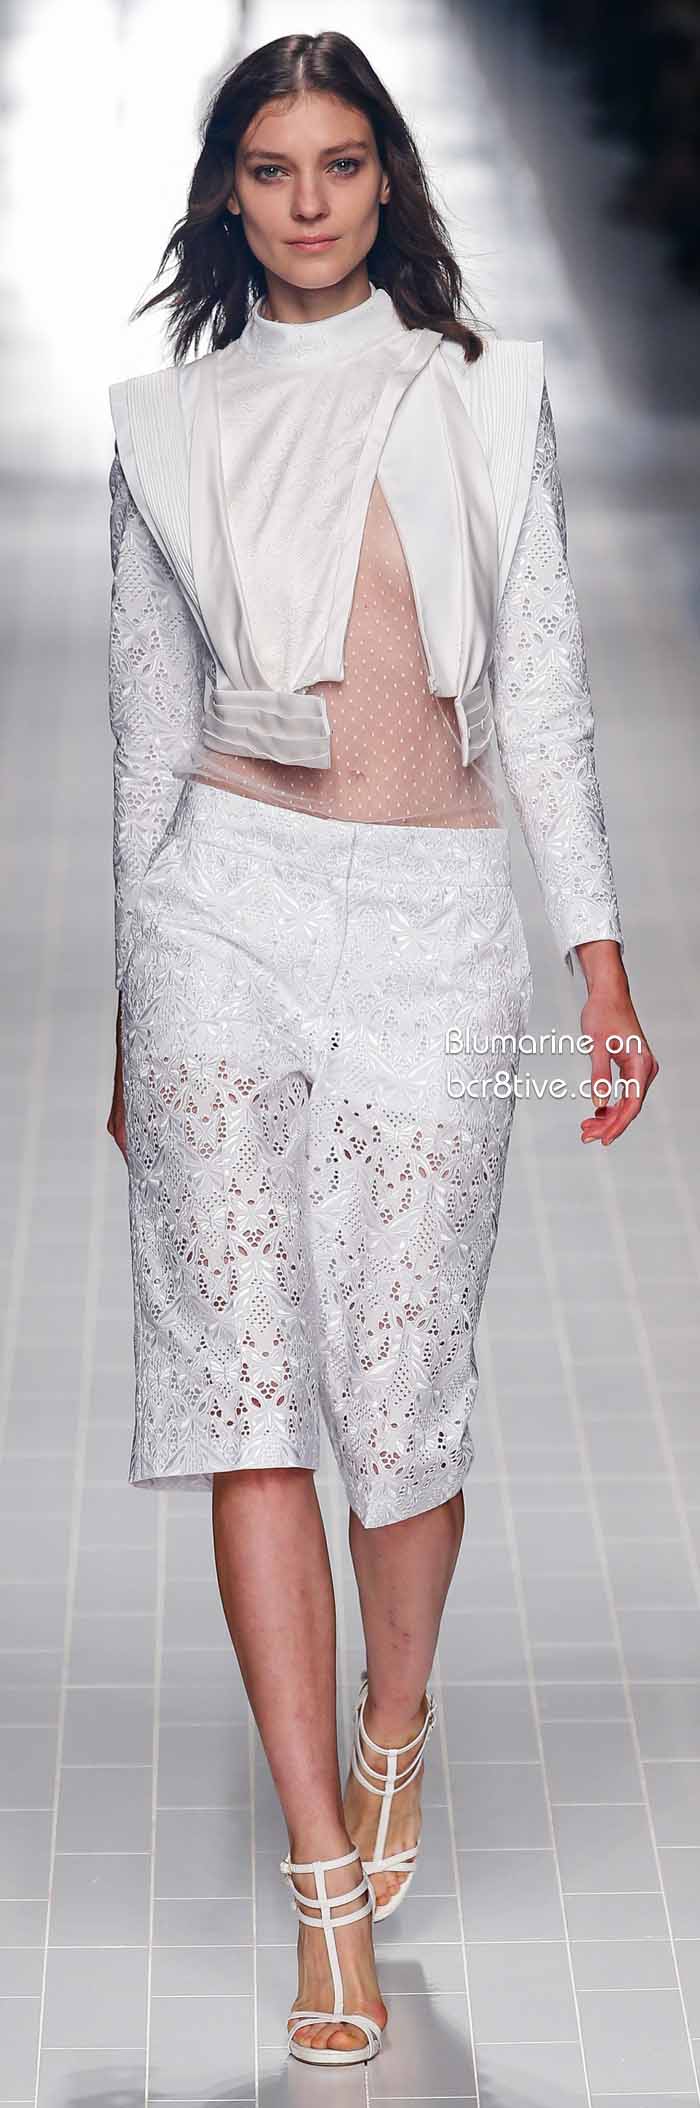 Blumarine Spring 2014 Ready to Wear Collection – Be Creative